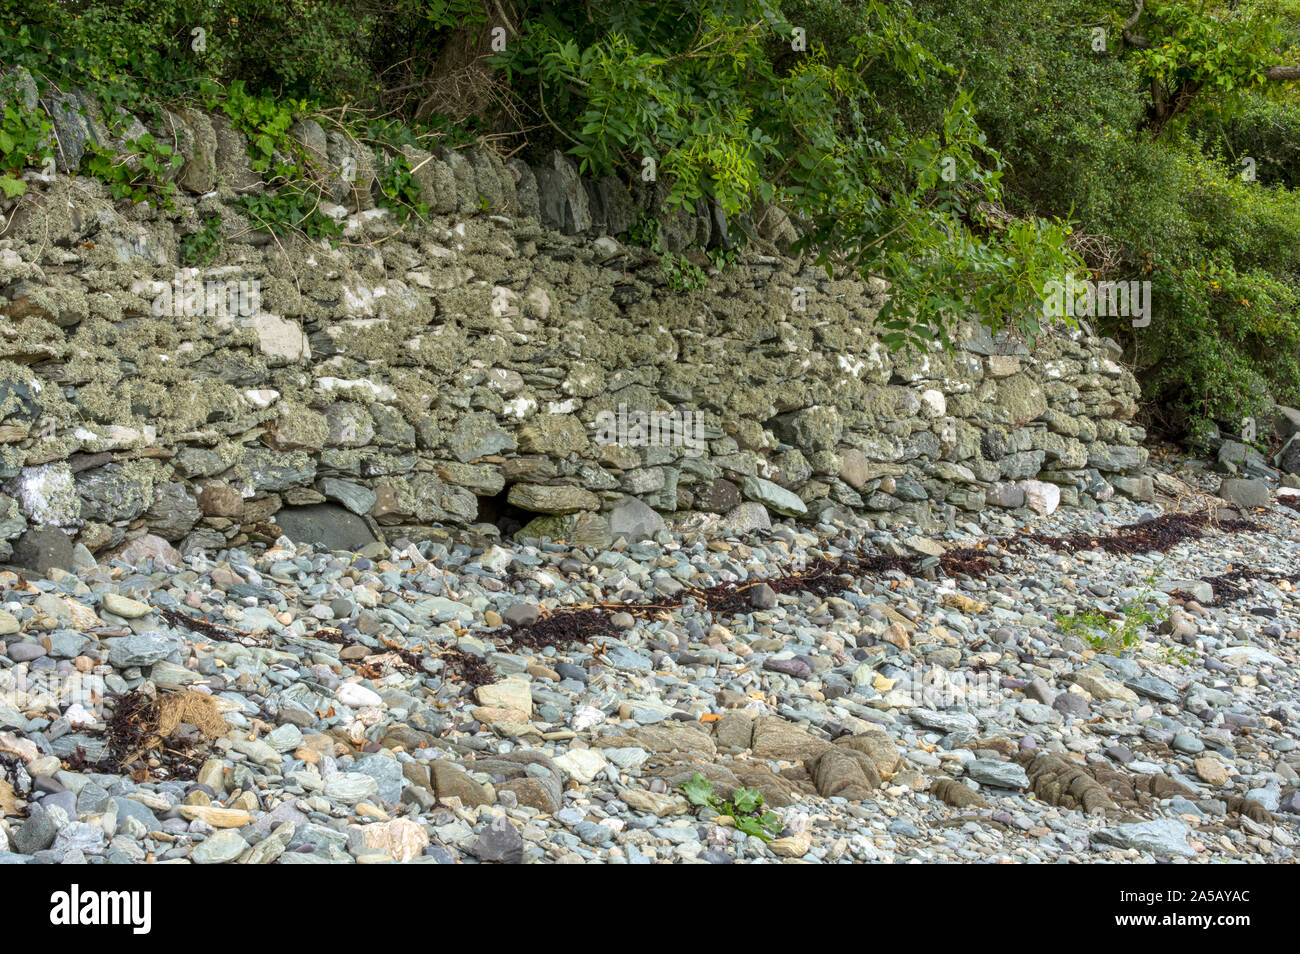 A wall built to prevent coastal erosion, now beginning to be destroyed by wave action. Stock Photo